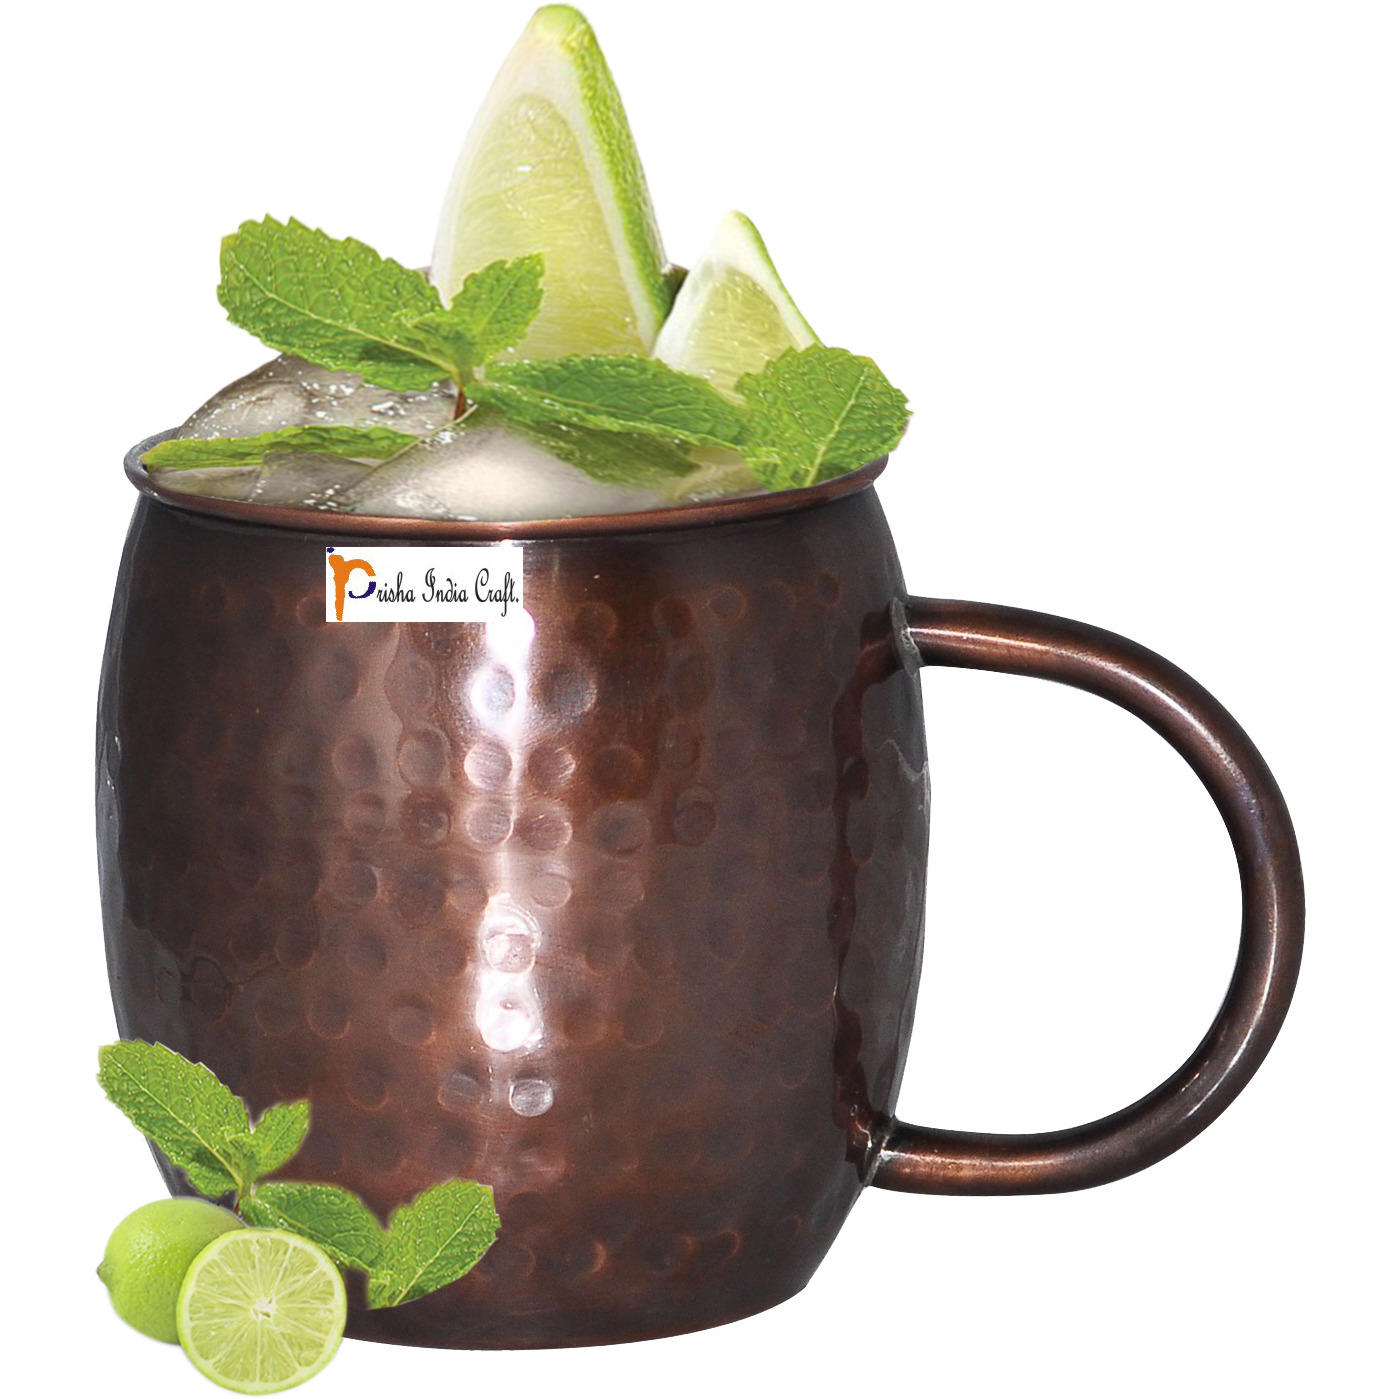 Set of 8 - Prisha India Craft B. Copper Mug for Moscow Mules 550 ML / 18 oz Inside Nickle Copper Antique Style Mug Lacquered Finish Best Quality, Moscow Mule Cocktail Cup, Copper Mugs, Cocktail Mugs